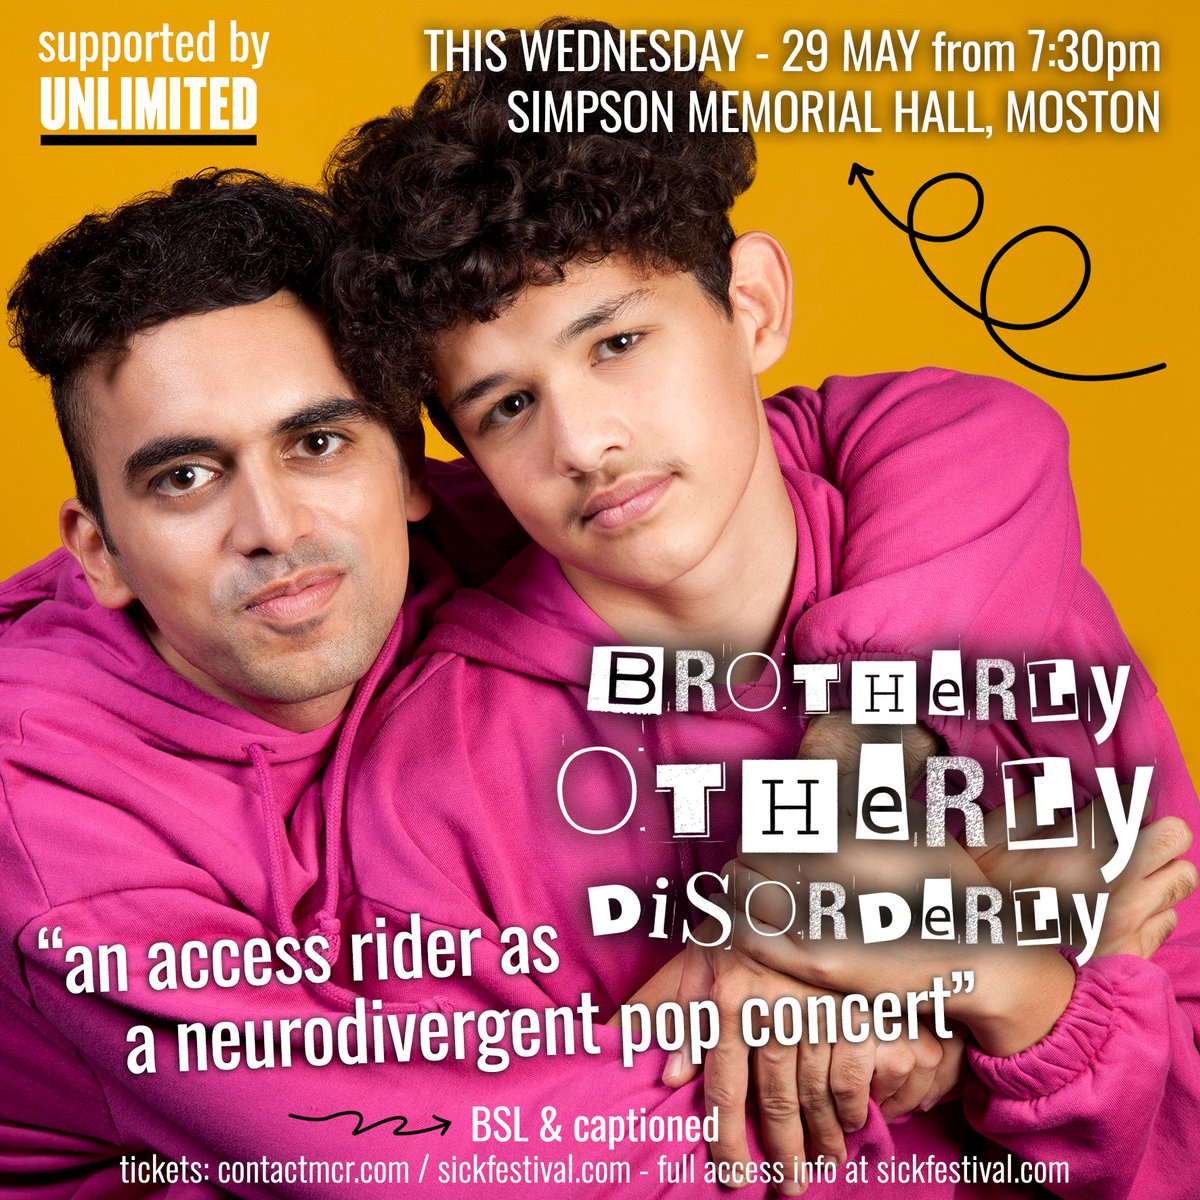 THIS WEDS 29th MAY: Supported by @weareunltd 'Brotherly, Otherly, Disorderly' by @vijayrajpatel92, will be at Simpson Memorial Hall in Moston from 7:30pm, telling the story of two autistic brothers navigating support & access, as a pop concert! Tickets: shorturl.at/zAhHE